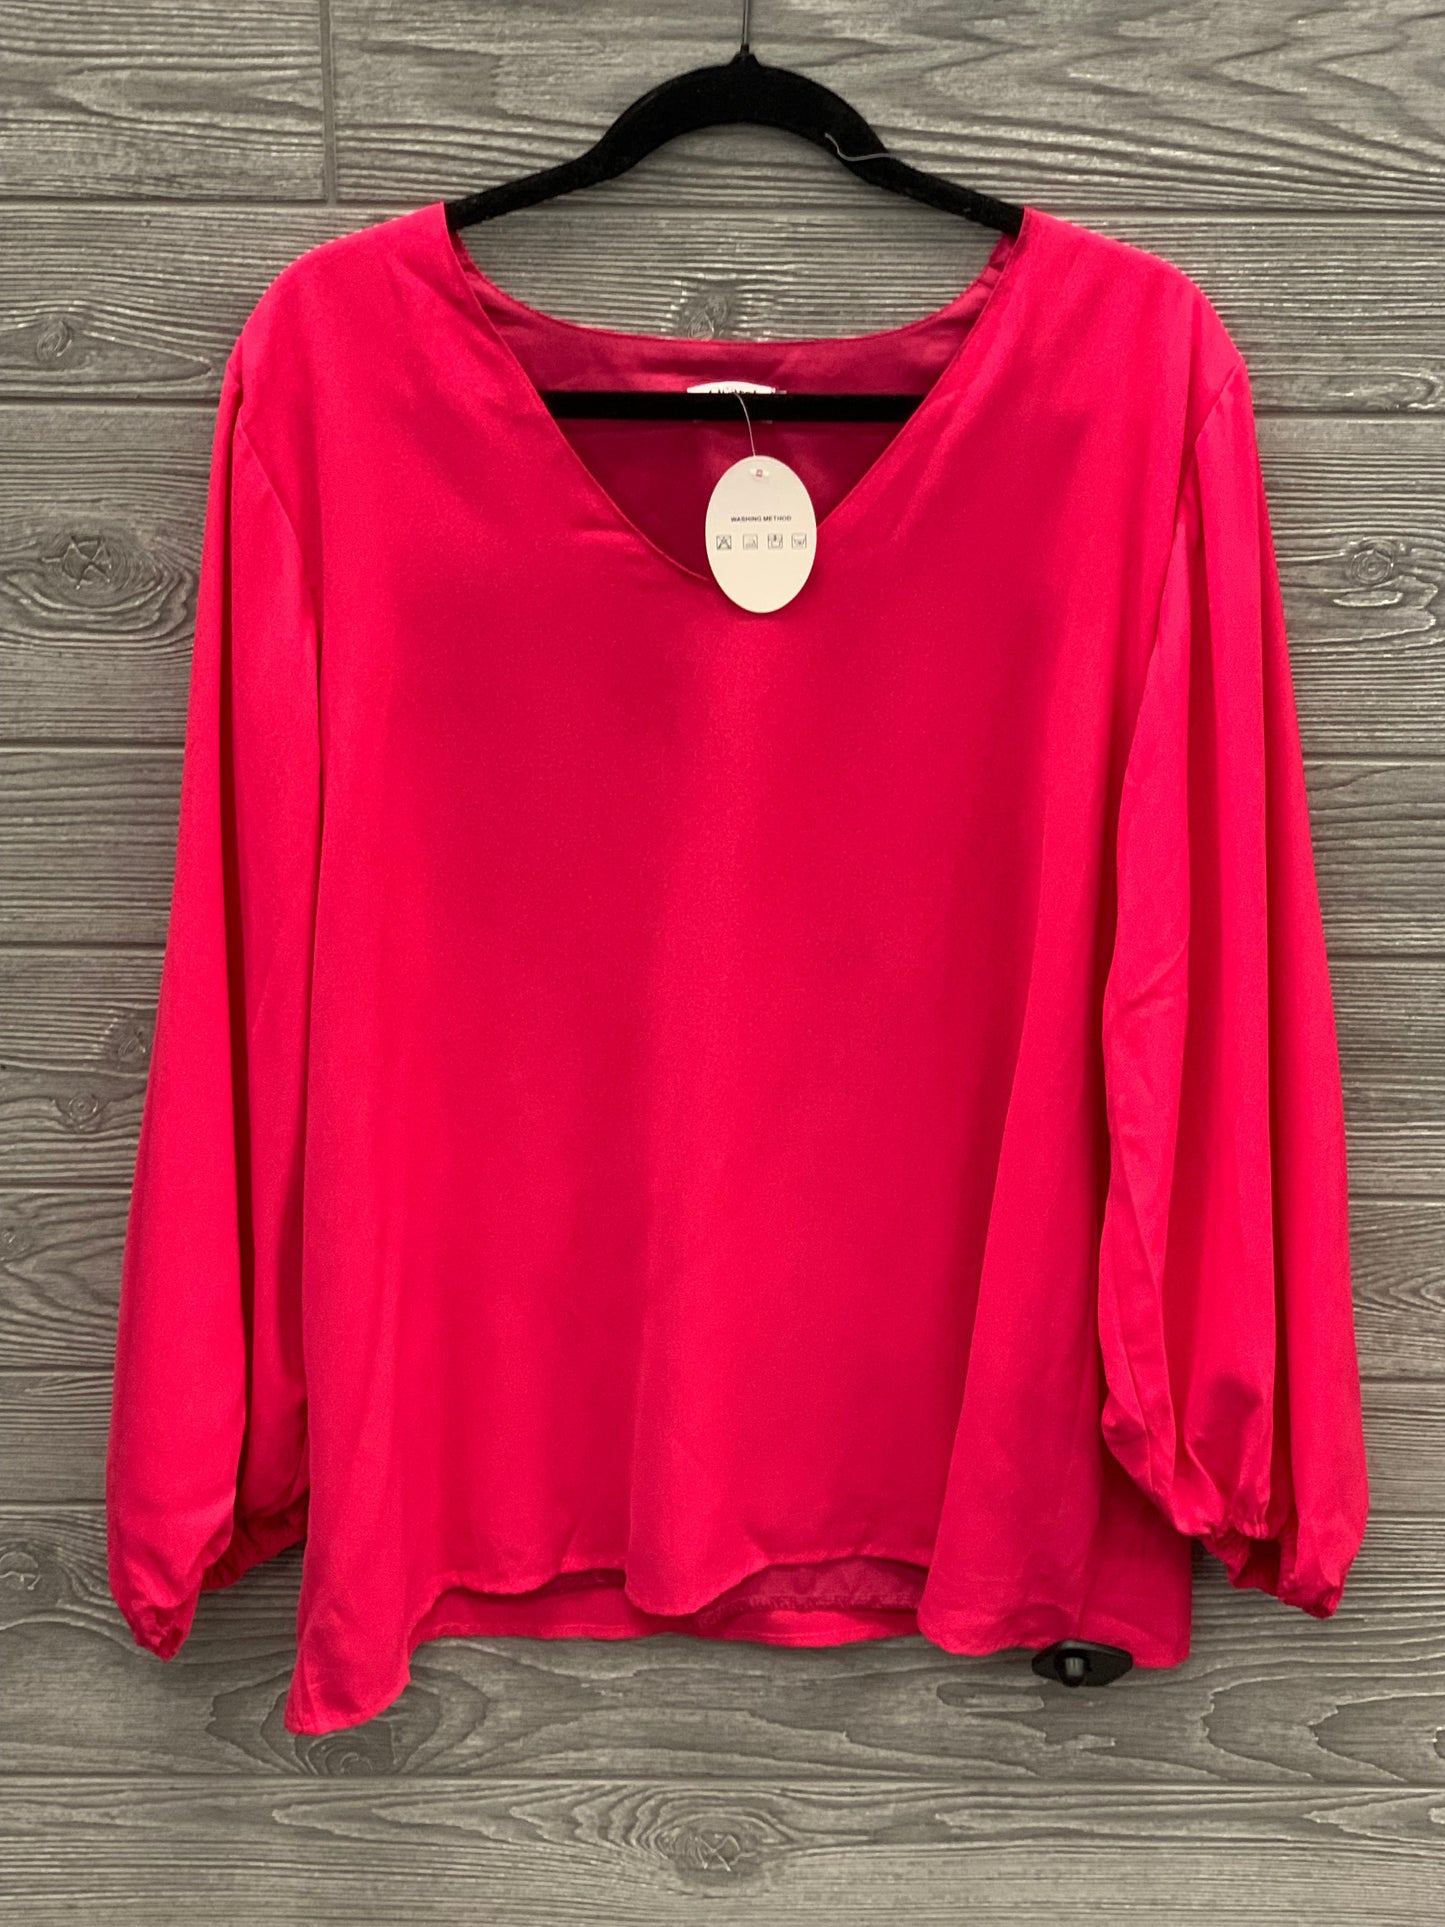 Pink Top Long Sleeve Cmf, Size Xl